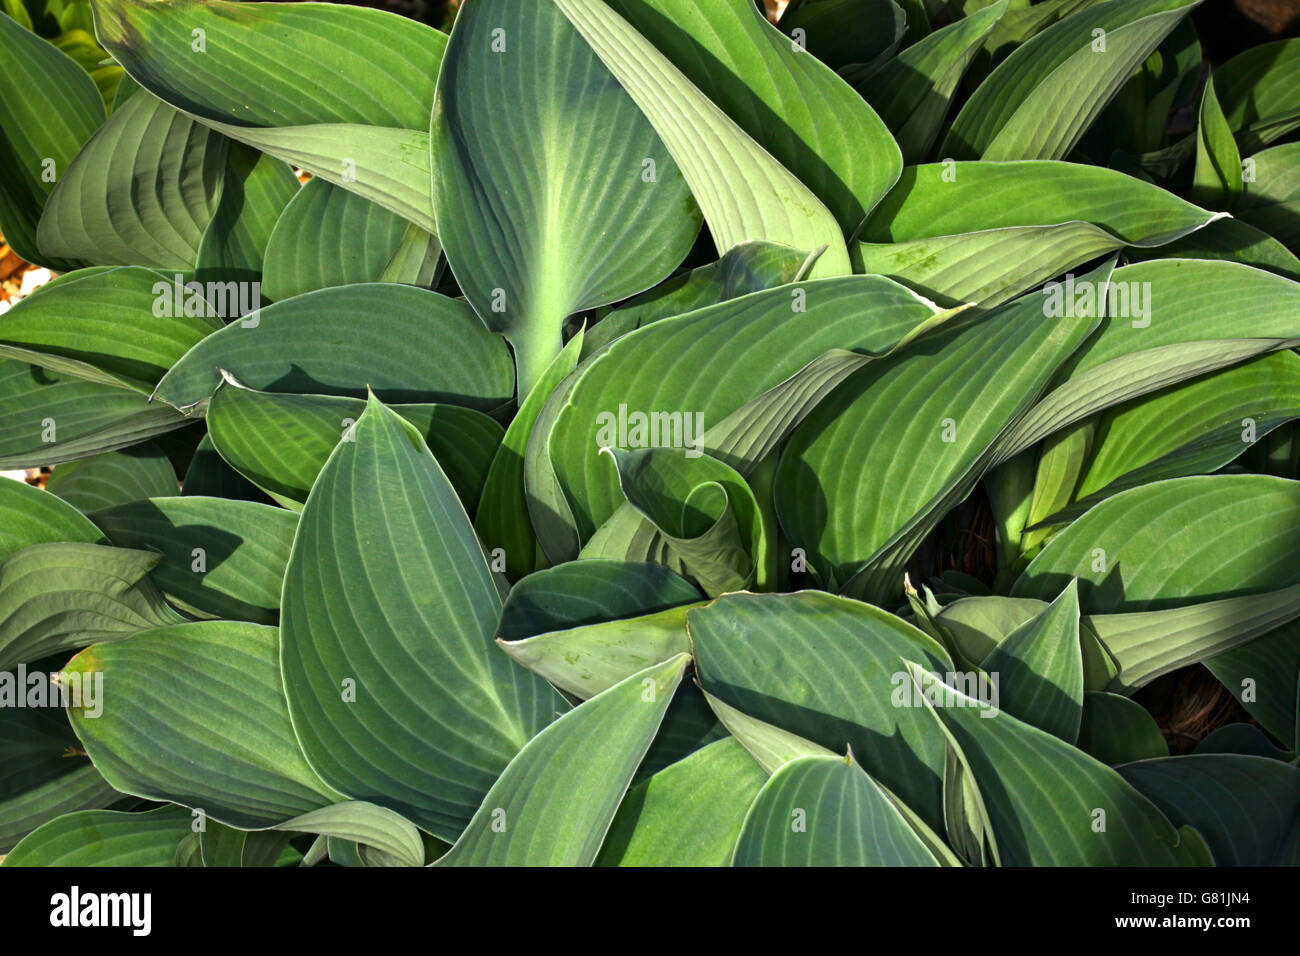 Textures and hues of green in this pattern of natural plants in a hosta bed Stock Photo